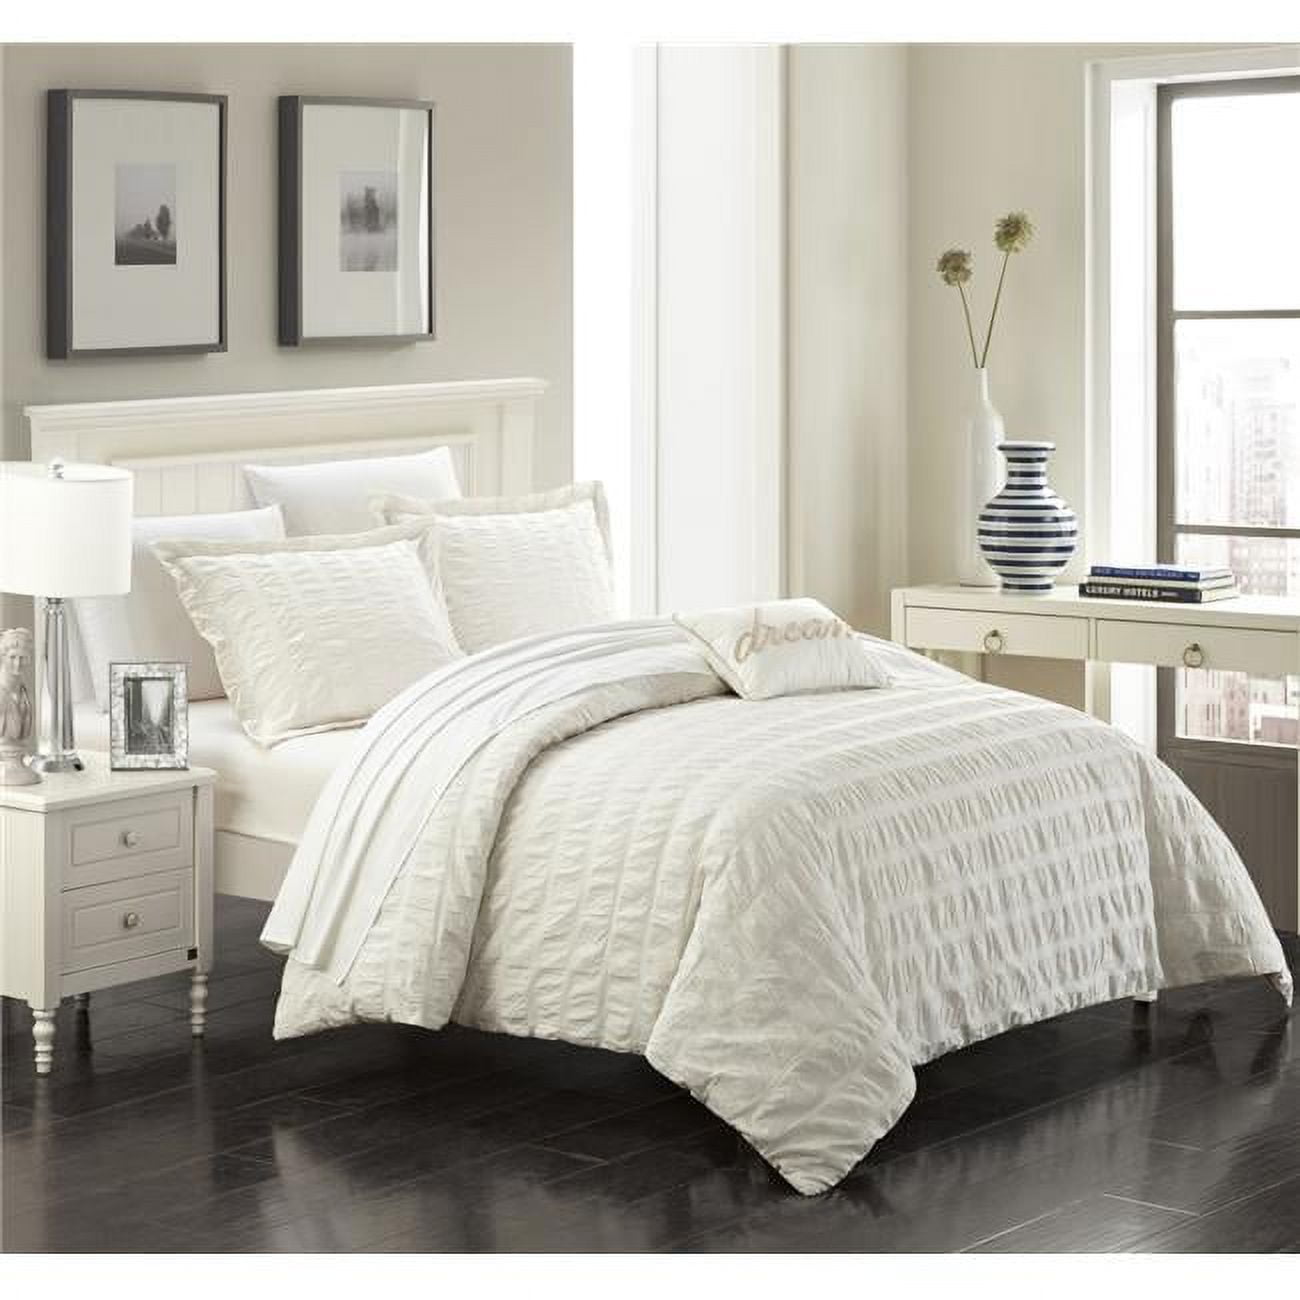 DS3116 Amarillo Duvet Cover Set - King Size, White - 4 Piece -  Chic Home, CH55517